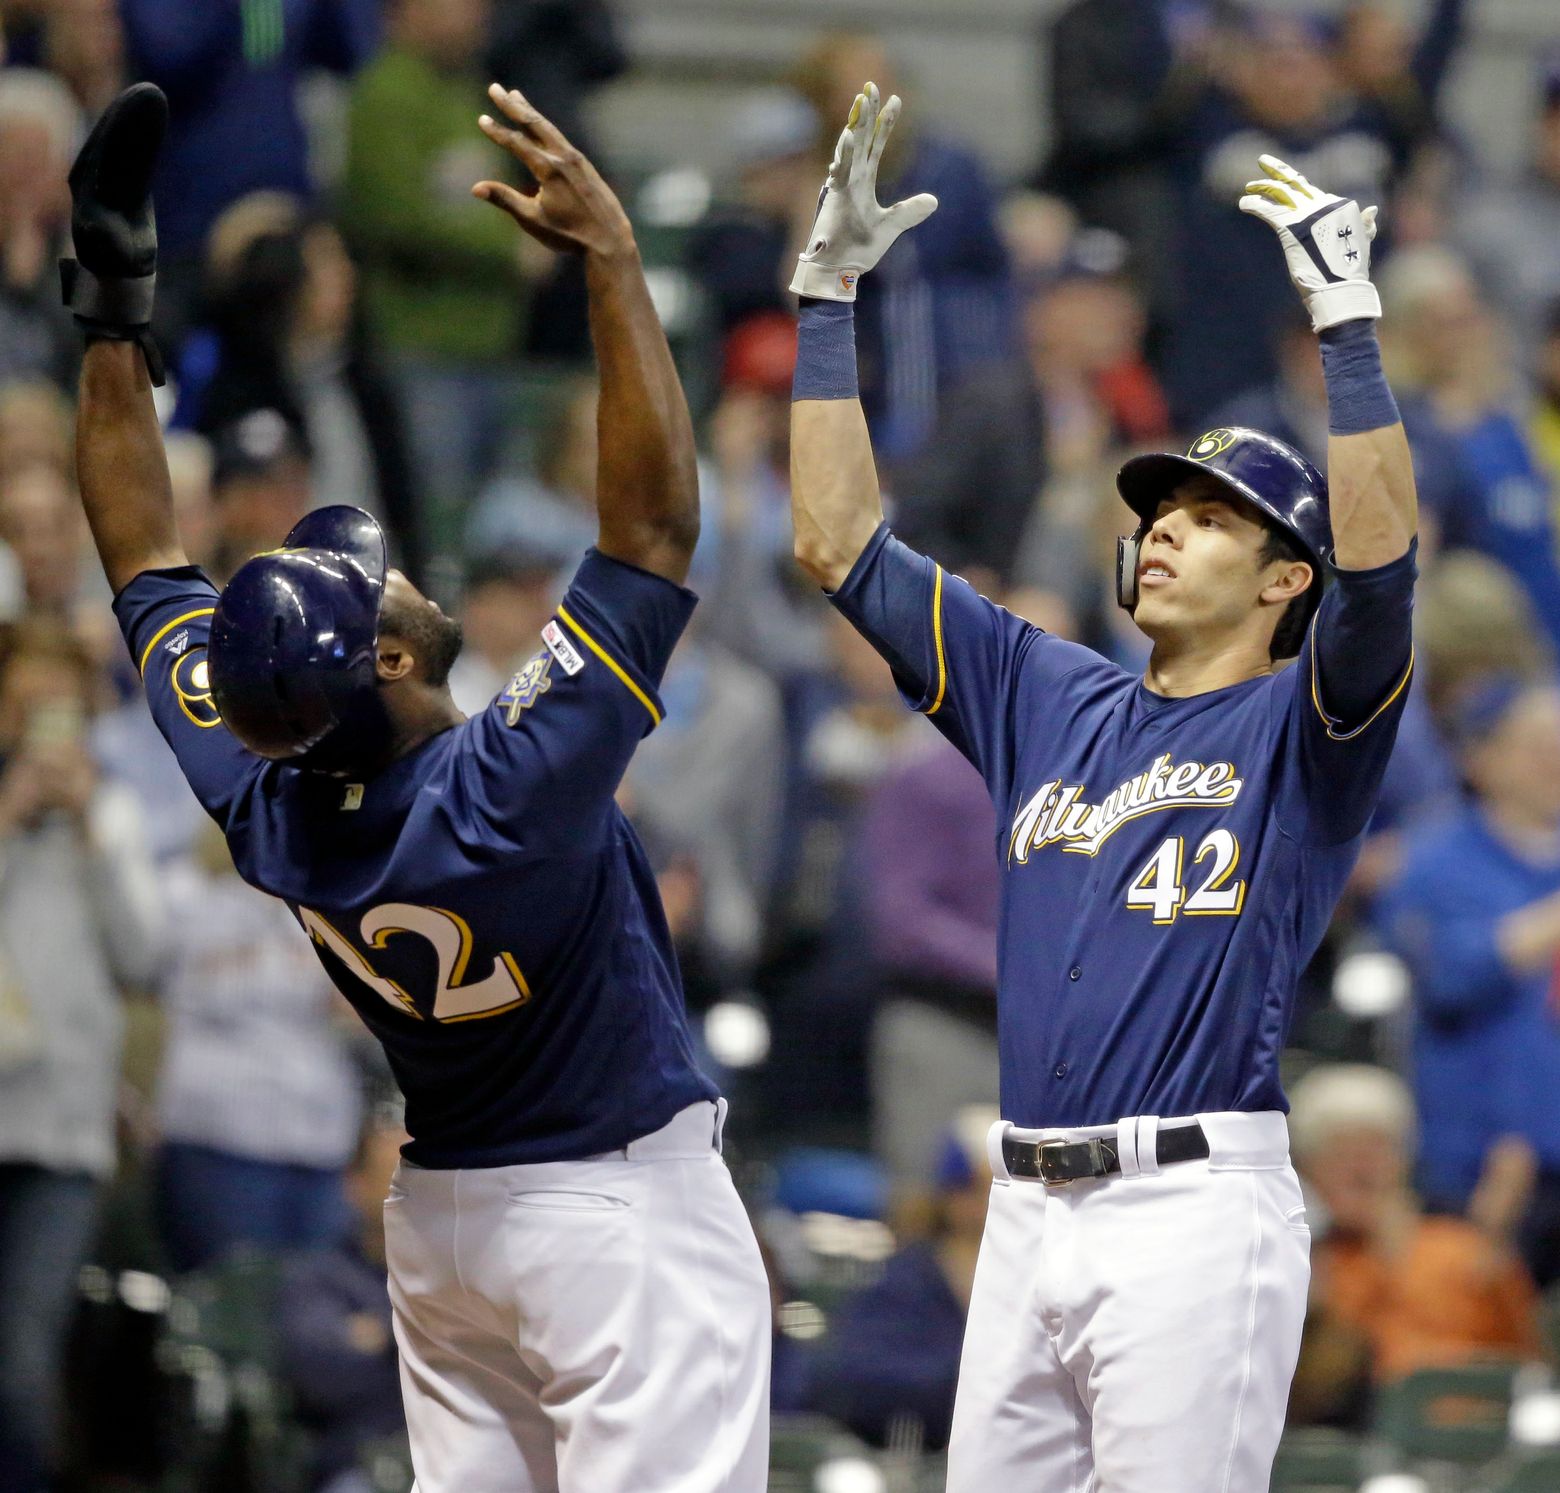 Contreras's 7th-inning double leads Brewers over Phillies 5-3